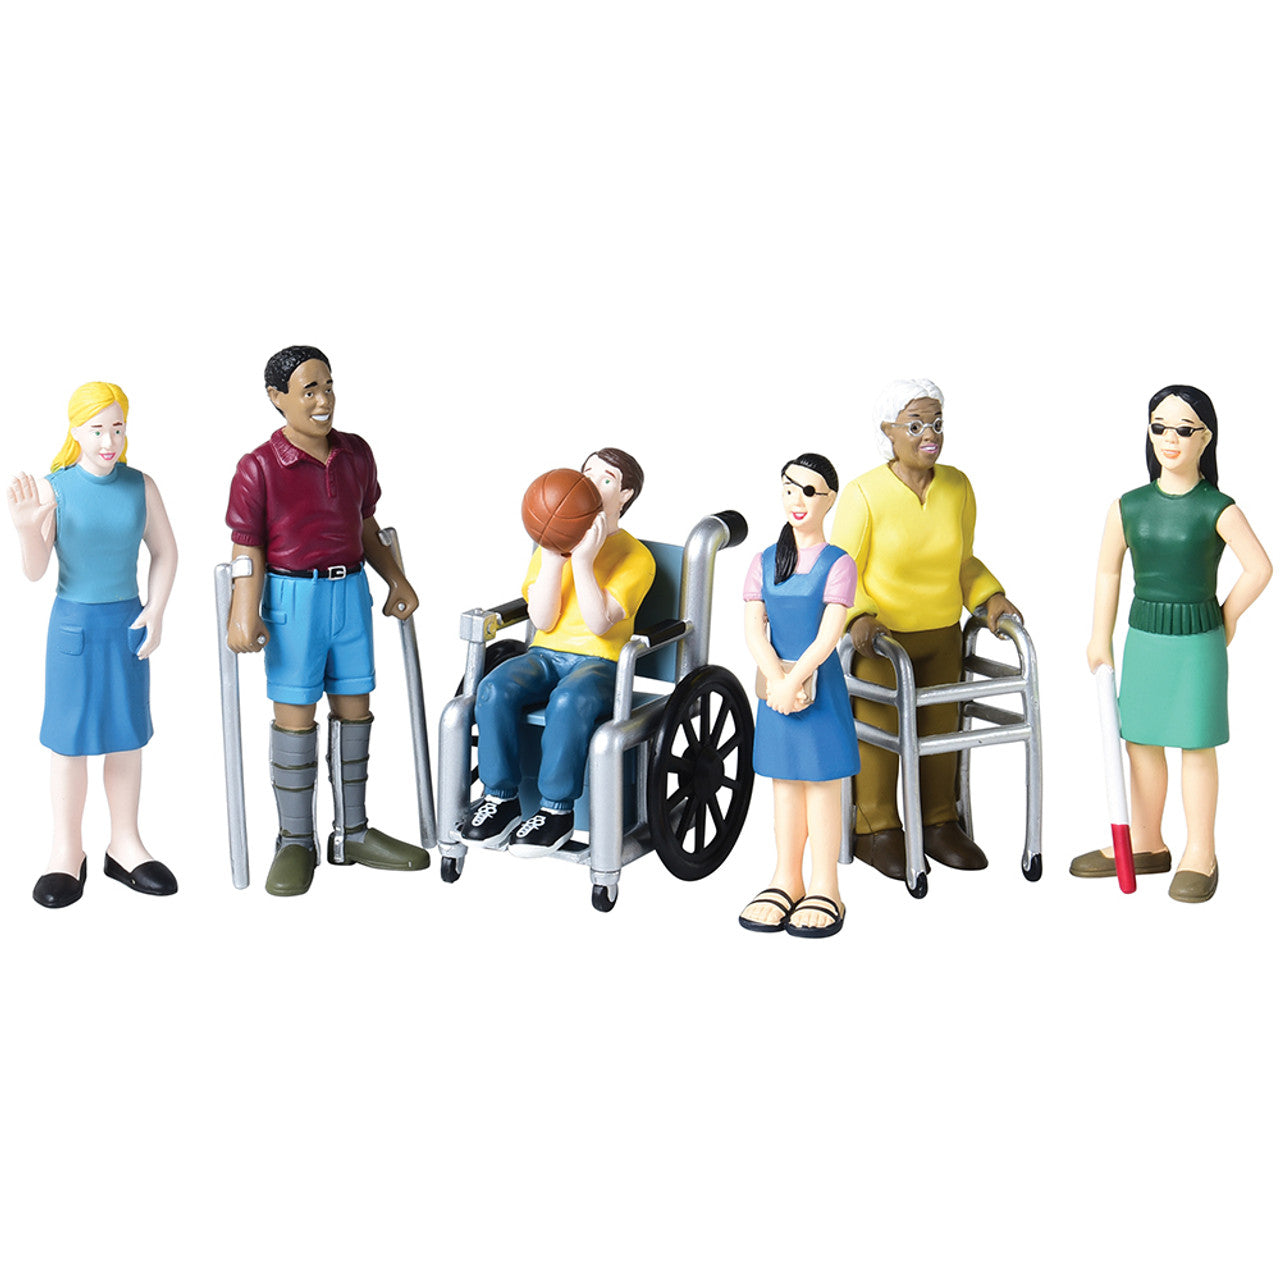 Friends With Diverse Abilities - 6 pc